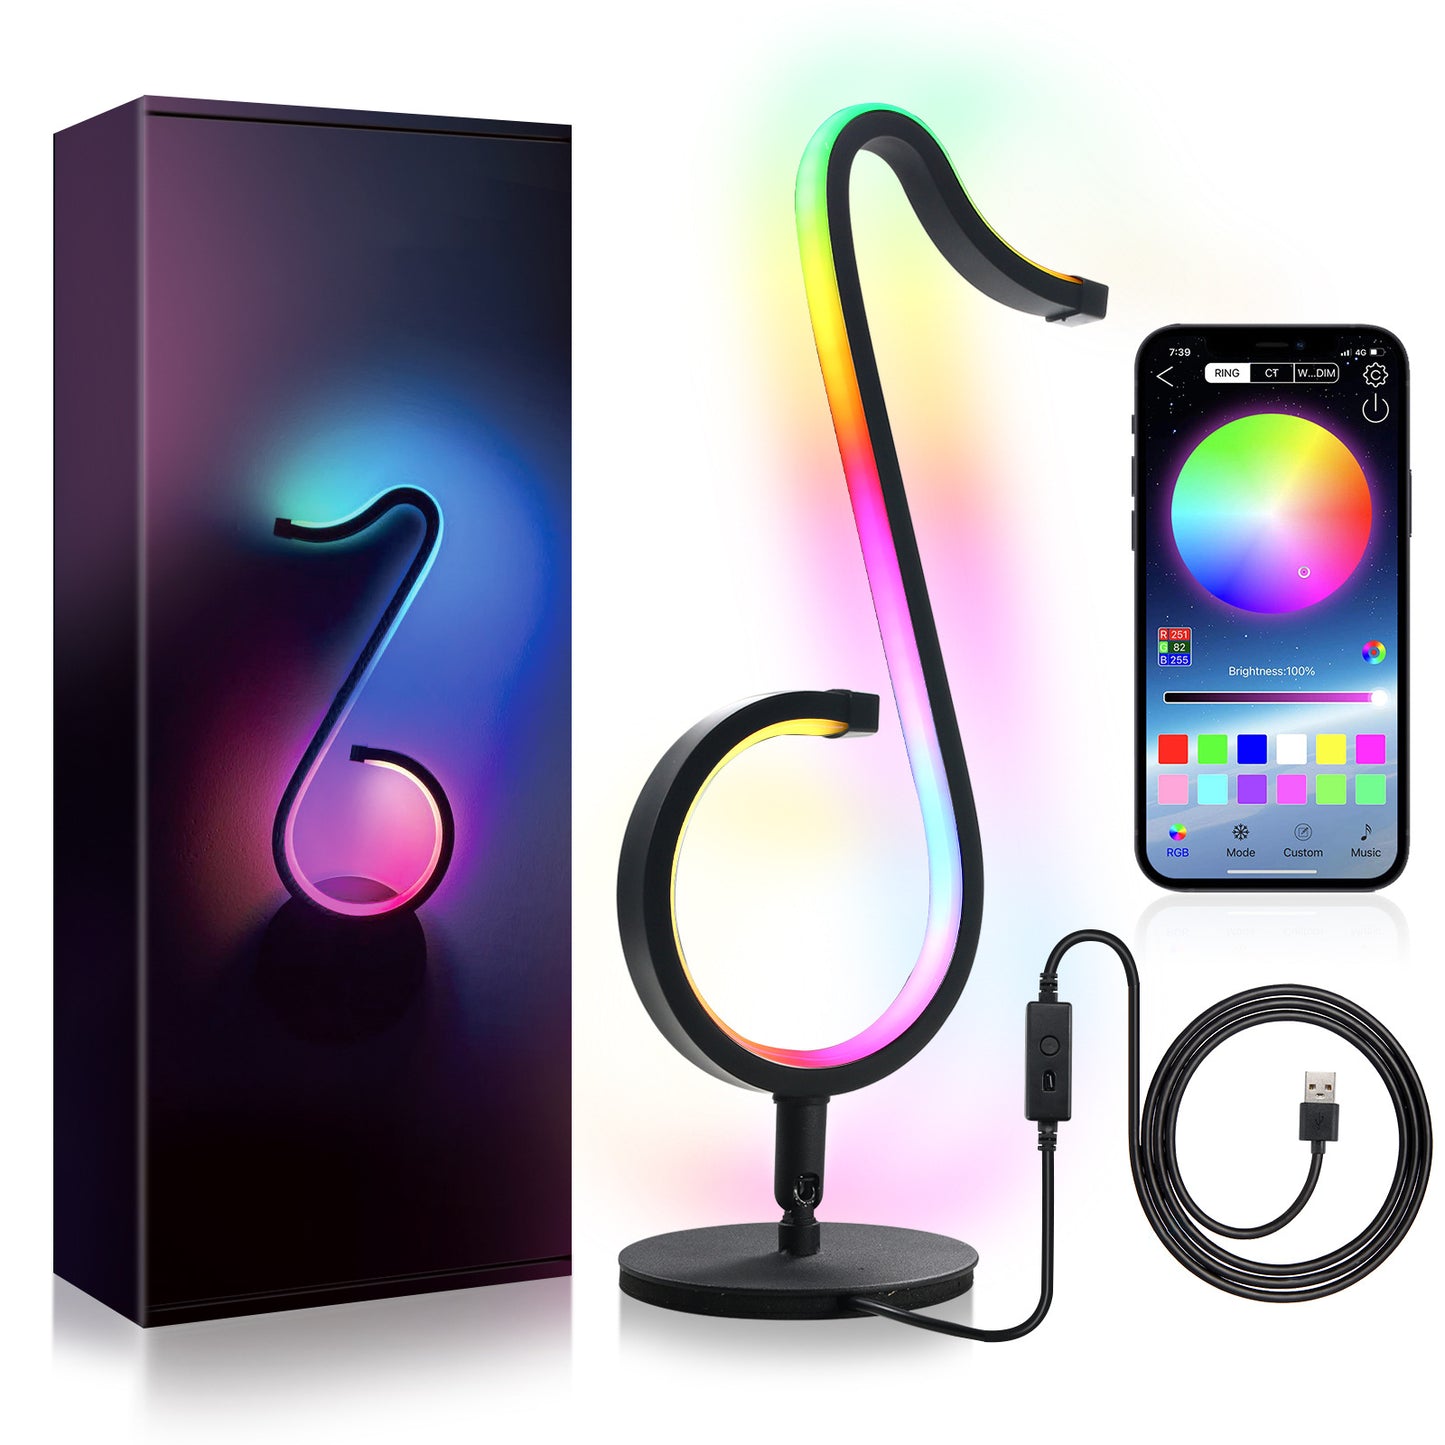 Musical note lights